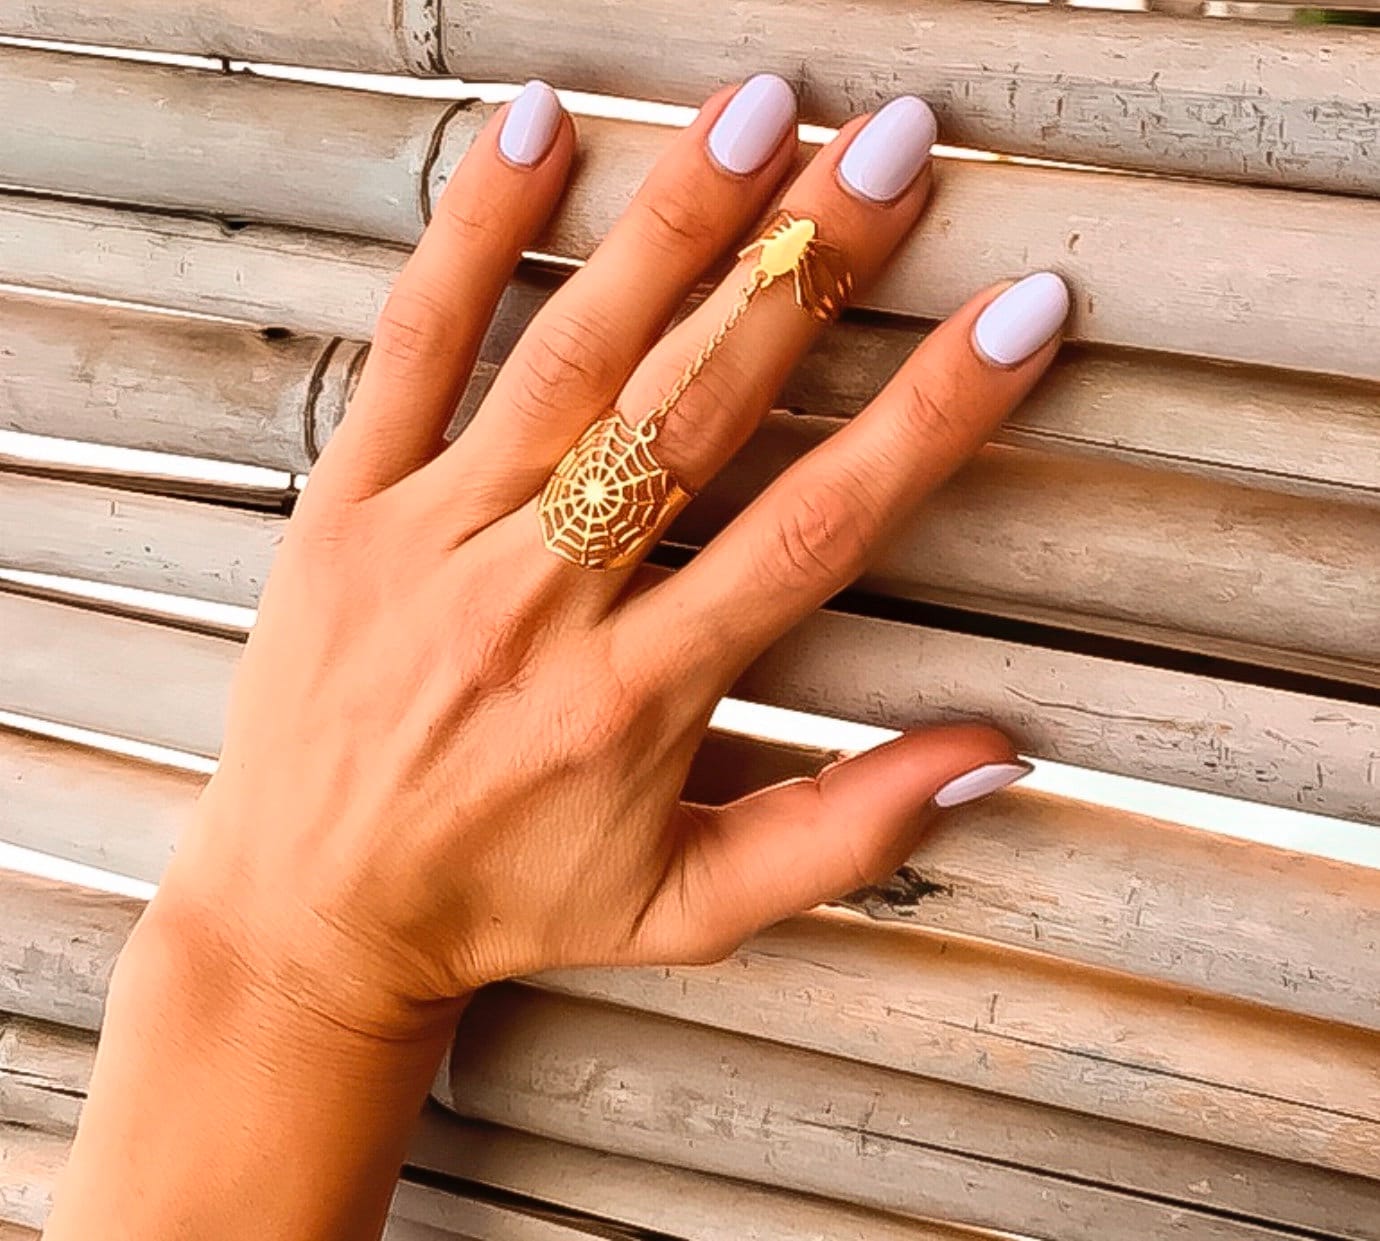 925 Sterling Silver French Gold Geometric Finger Ring On Middle Finger For  Women Elegant And Minimalist Punk Party Jewelry From Bag4everyone, $5.34 |  DHgate.Com